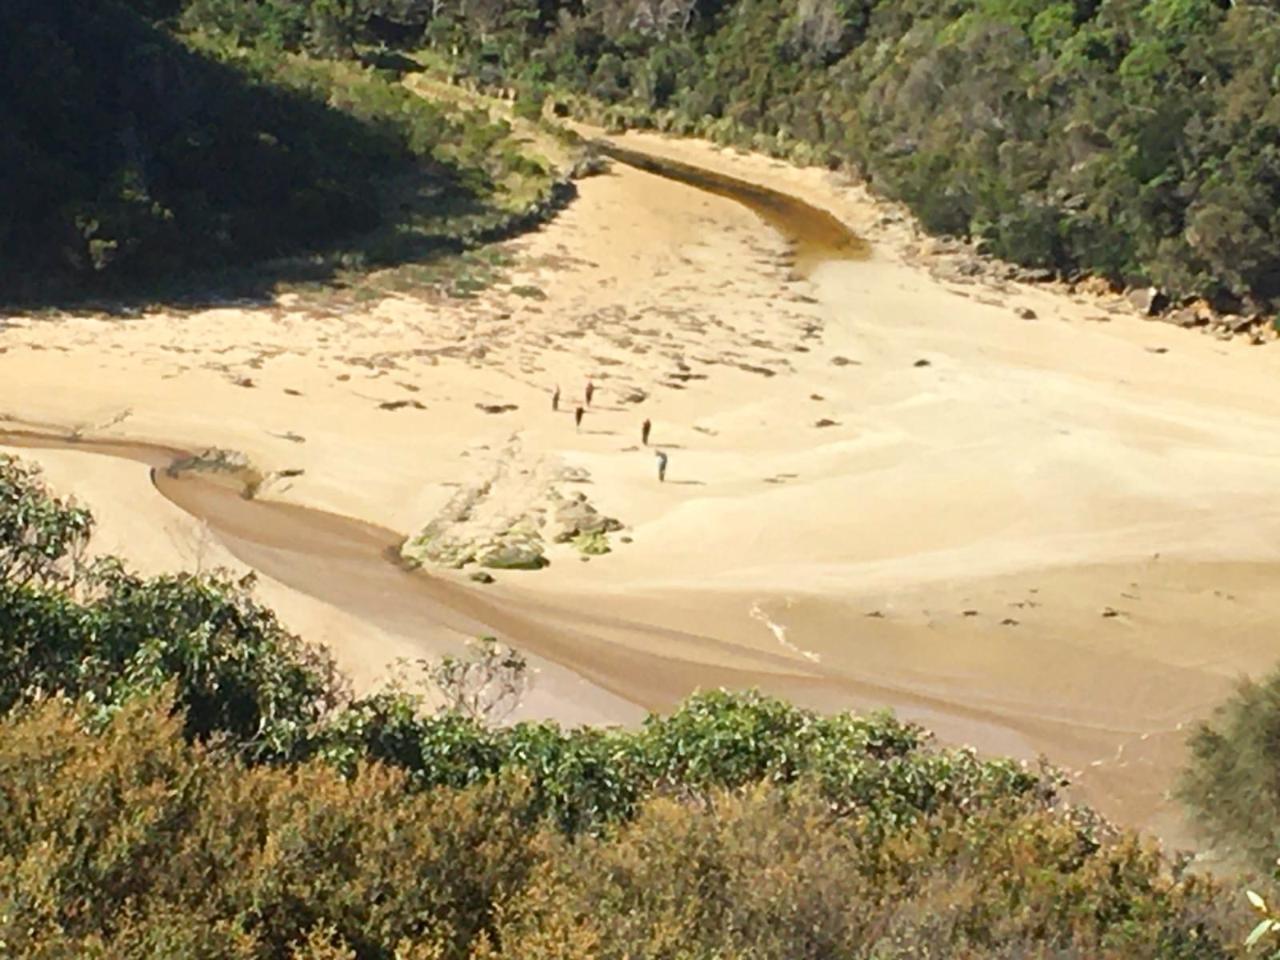 SUN: 2 Day Self-Guided Walk Tour. Apollo Bay to Parker Hill (Approx 27.5km) Departs Sunday 2PM